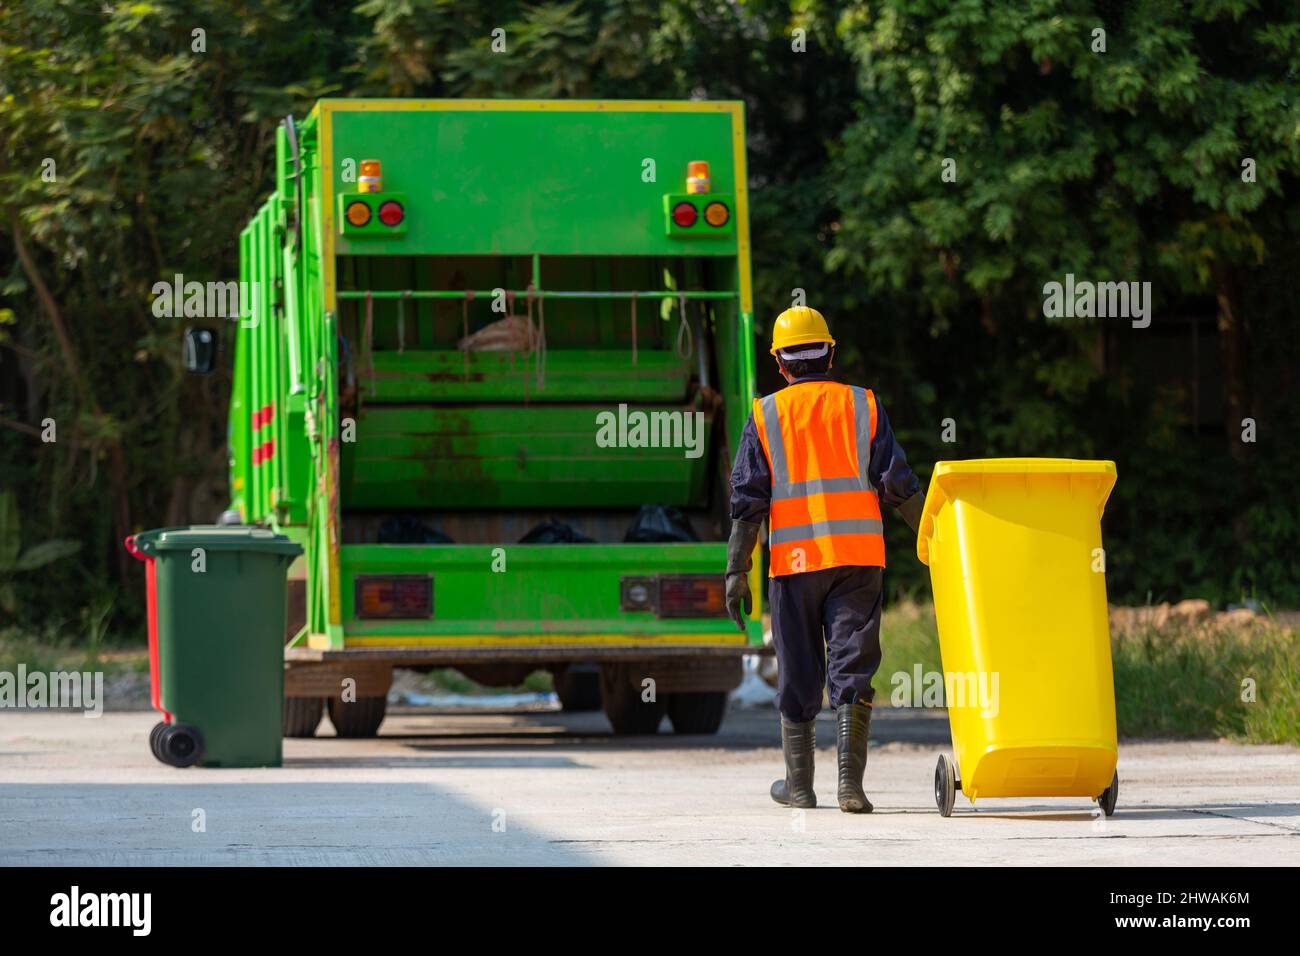 Garbage collector, Workers collect garbage with Garbage collection truck Stock Photo